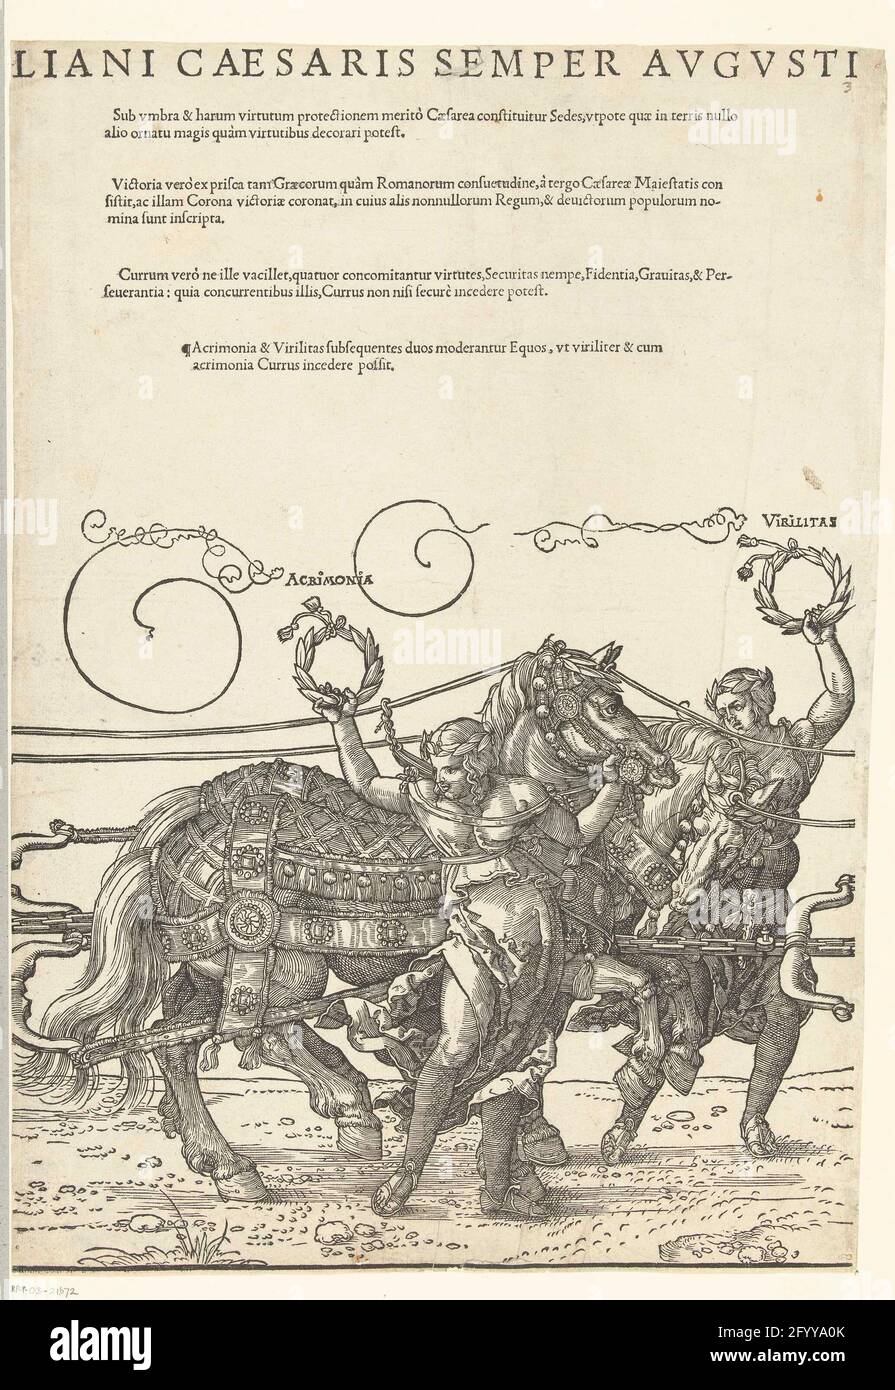 Triumphag from Emperor Maximilian I (Sixth Sheet), 1519; Copies to Dürers Triomfvag for Emperor Maximiliaan I, published in Antwerp in 1545 by the widow of Cornelis Liefrinck; Triumphalis His Currus Ad Honorem Invictiss. AC Gloriosiss. Principis D. Maximiliani Caesis Semper Augusti (...) per Albertum Durer Delineatus. The Great Triomfvag in honor of Emperor Maximiliaan I at his death on January 12, 1519. Sixth leaf with the fourth span horses with acrimonia and virilitas. Copy to the original of Albrecht Dürer from 1522. Stock Photo